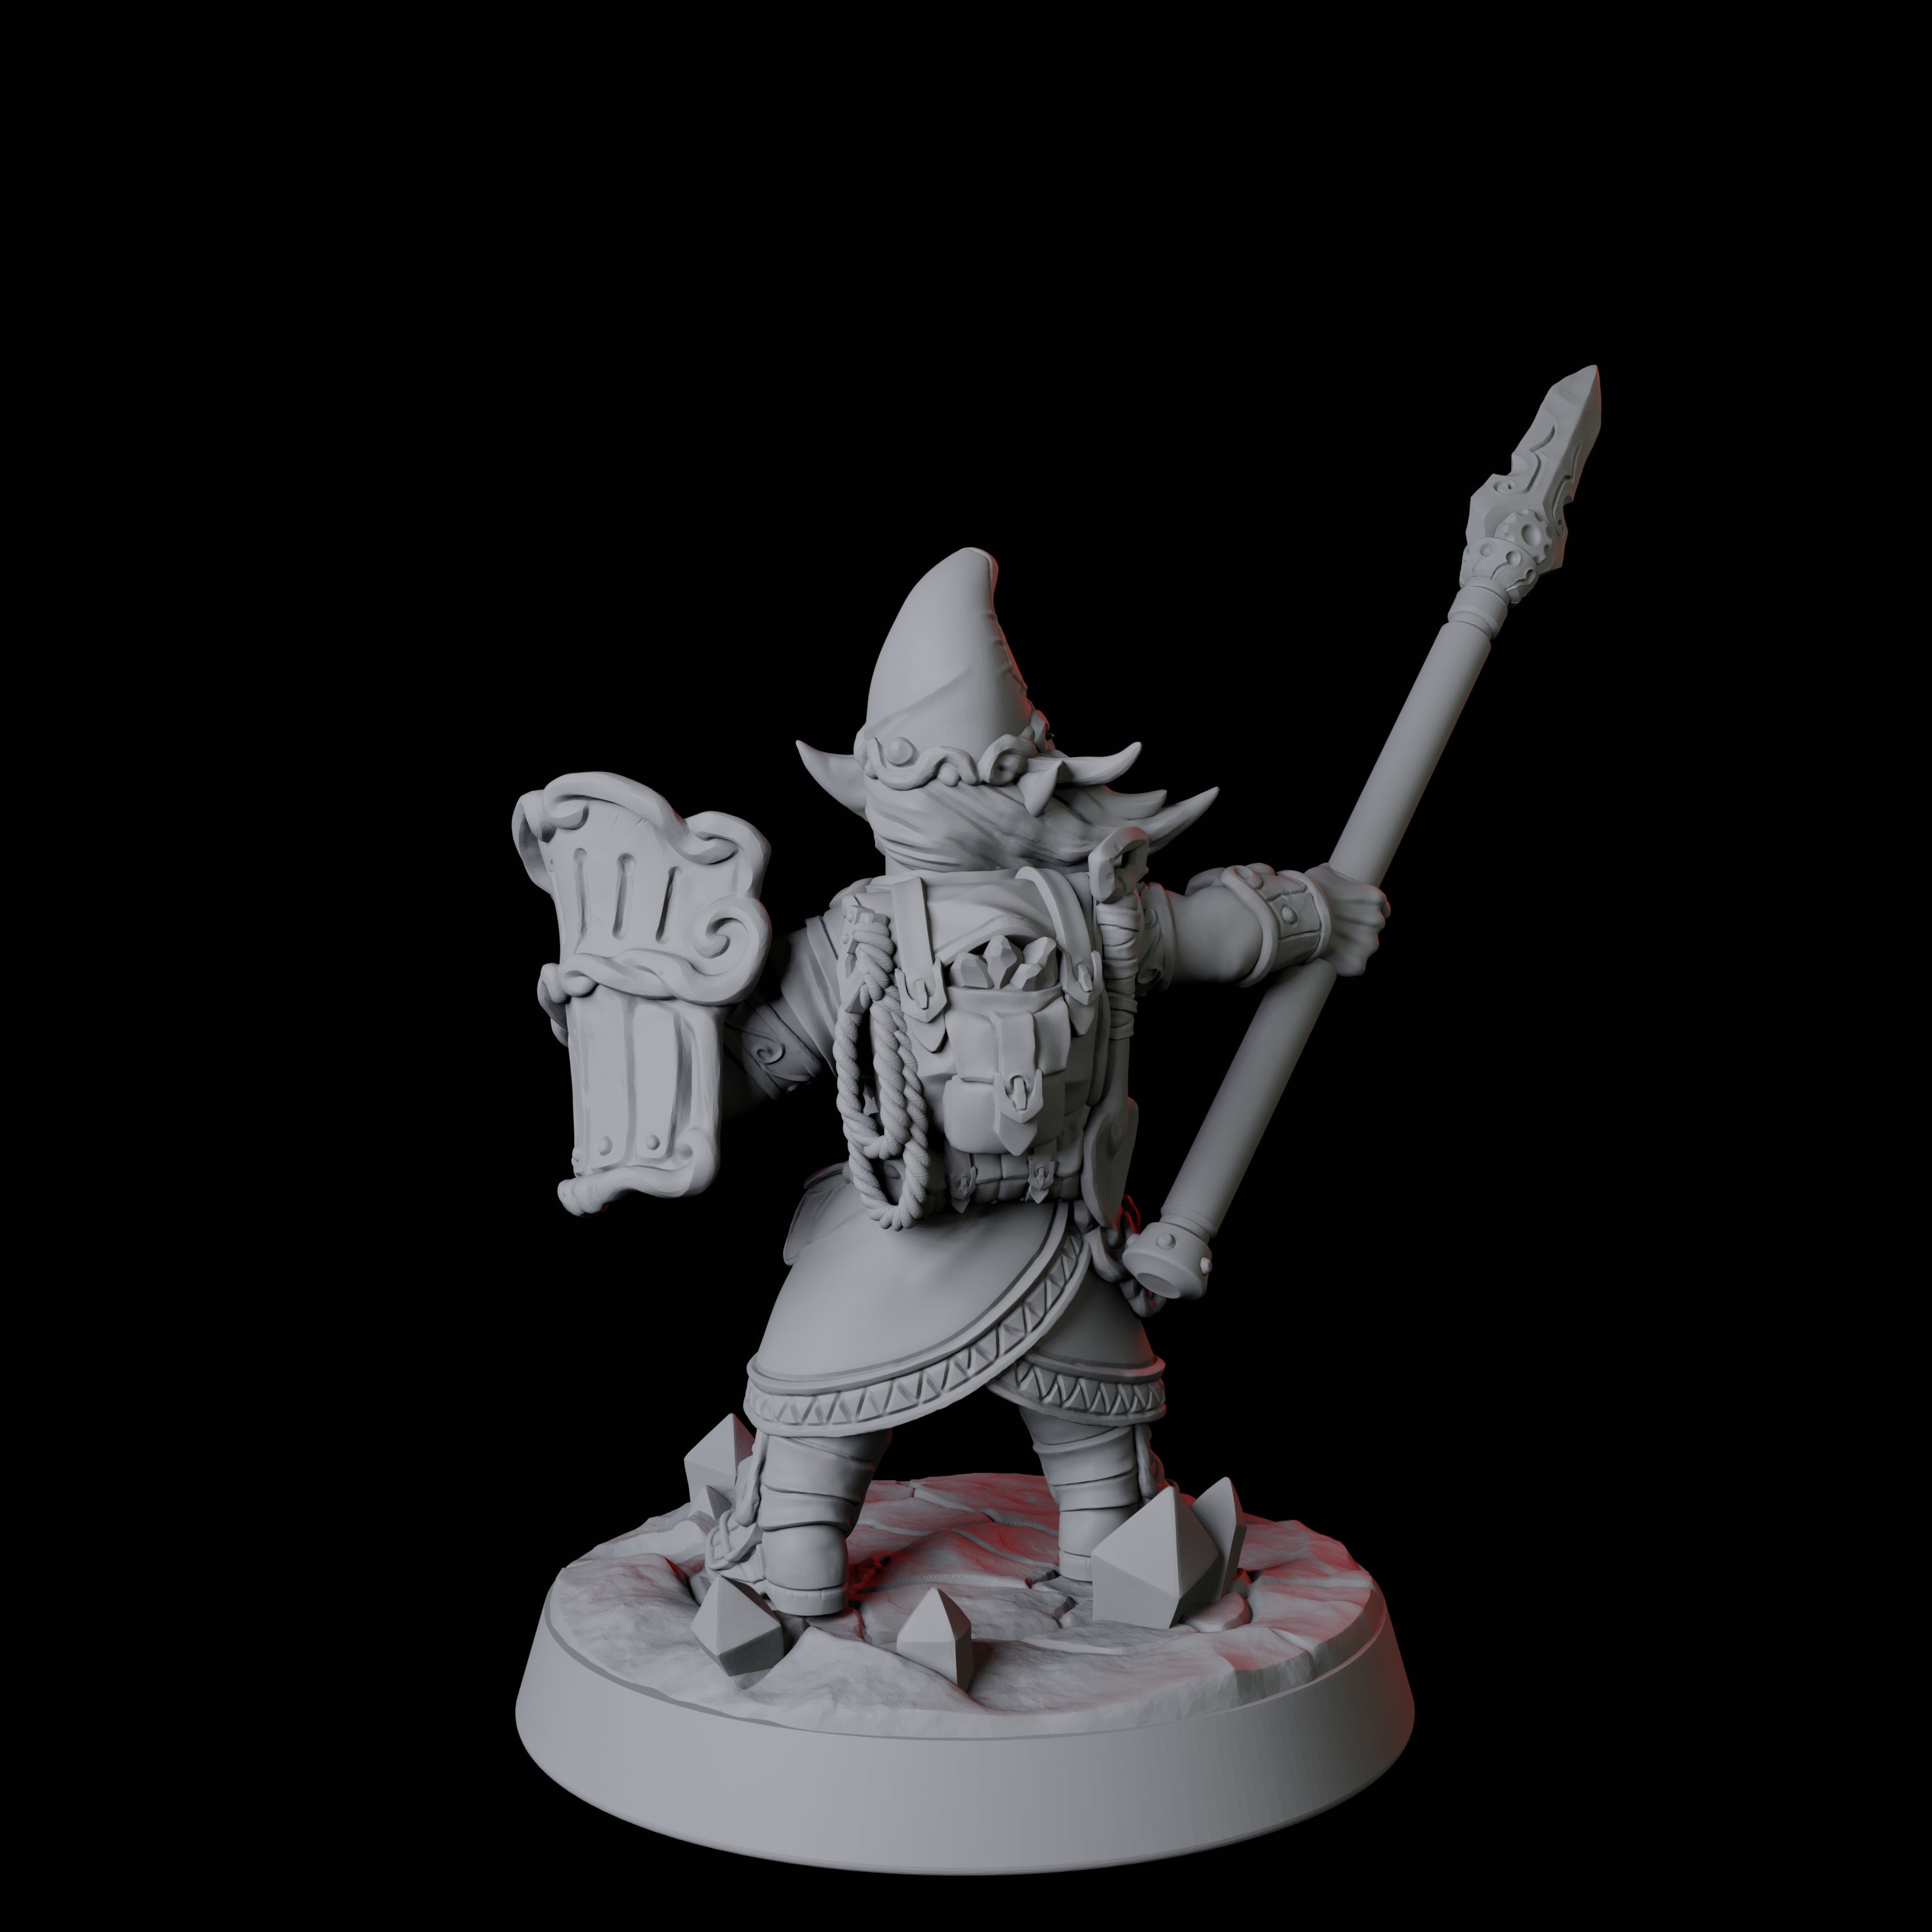 Gnome Miner E Miniature for Dungeons and Dragons, Pathfinder or other TTRPGs